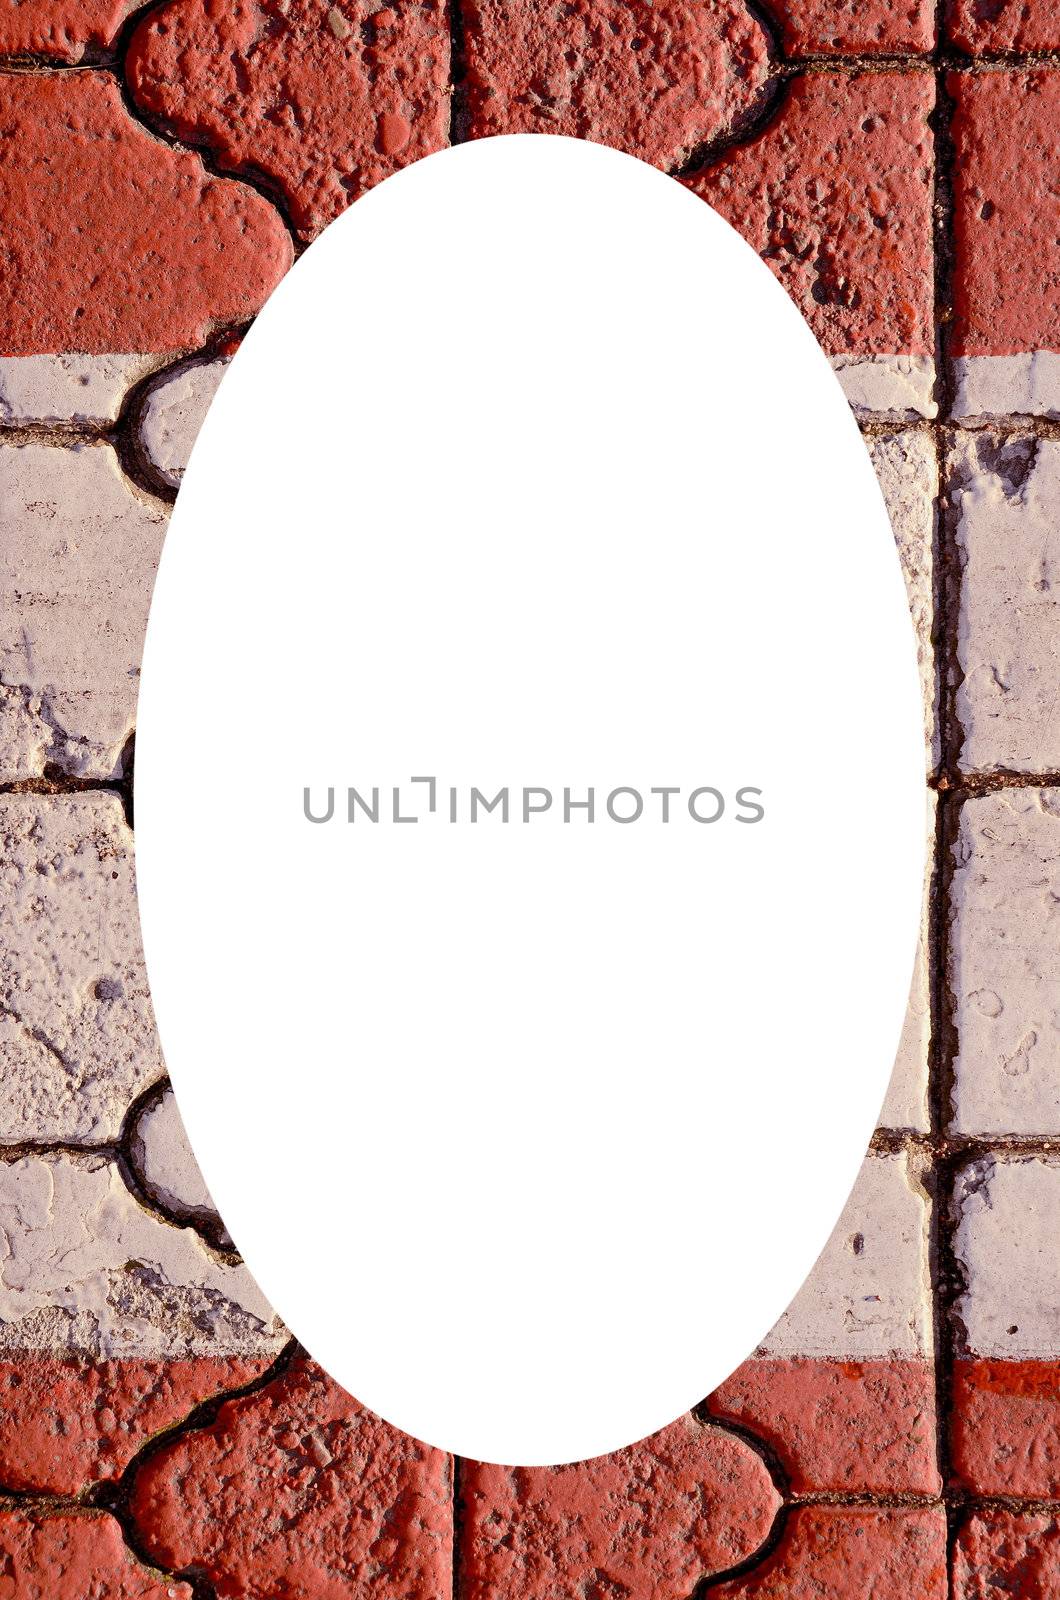 Isolated white oval place for text photograph image in center of frame. Wall fragment built of intresting bricks. Architectural background.